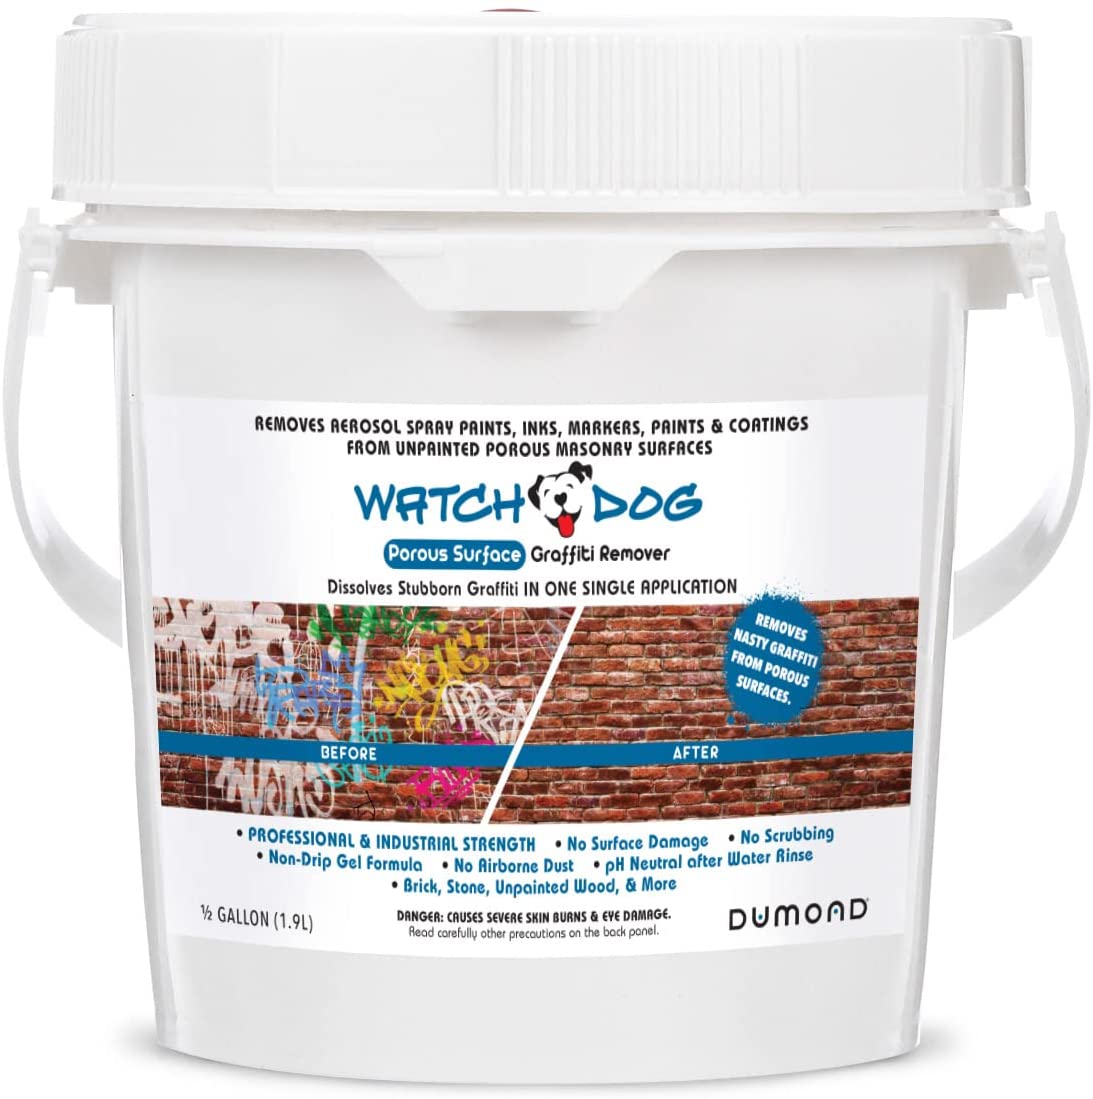 Dumond 8402 Watch Dog Wipe Out Porous Surface Graffiti Remover, 1/2 Gallon Tub